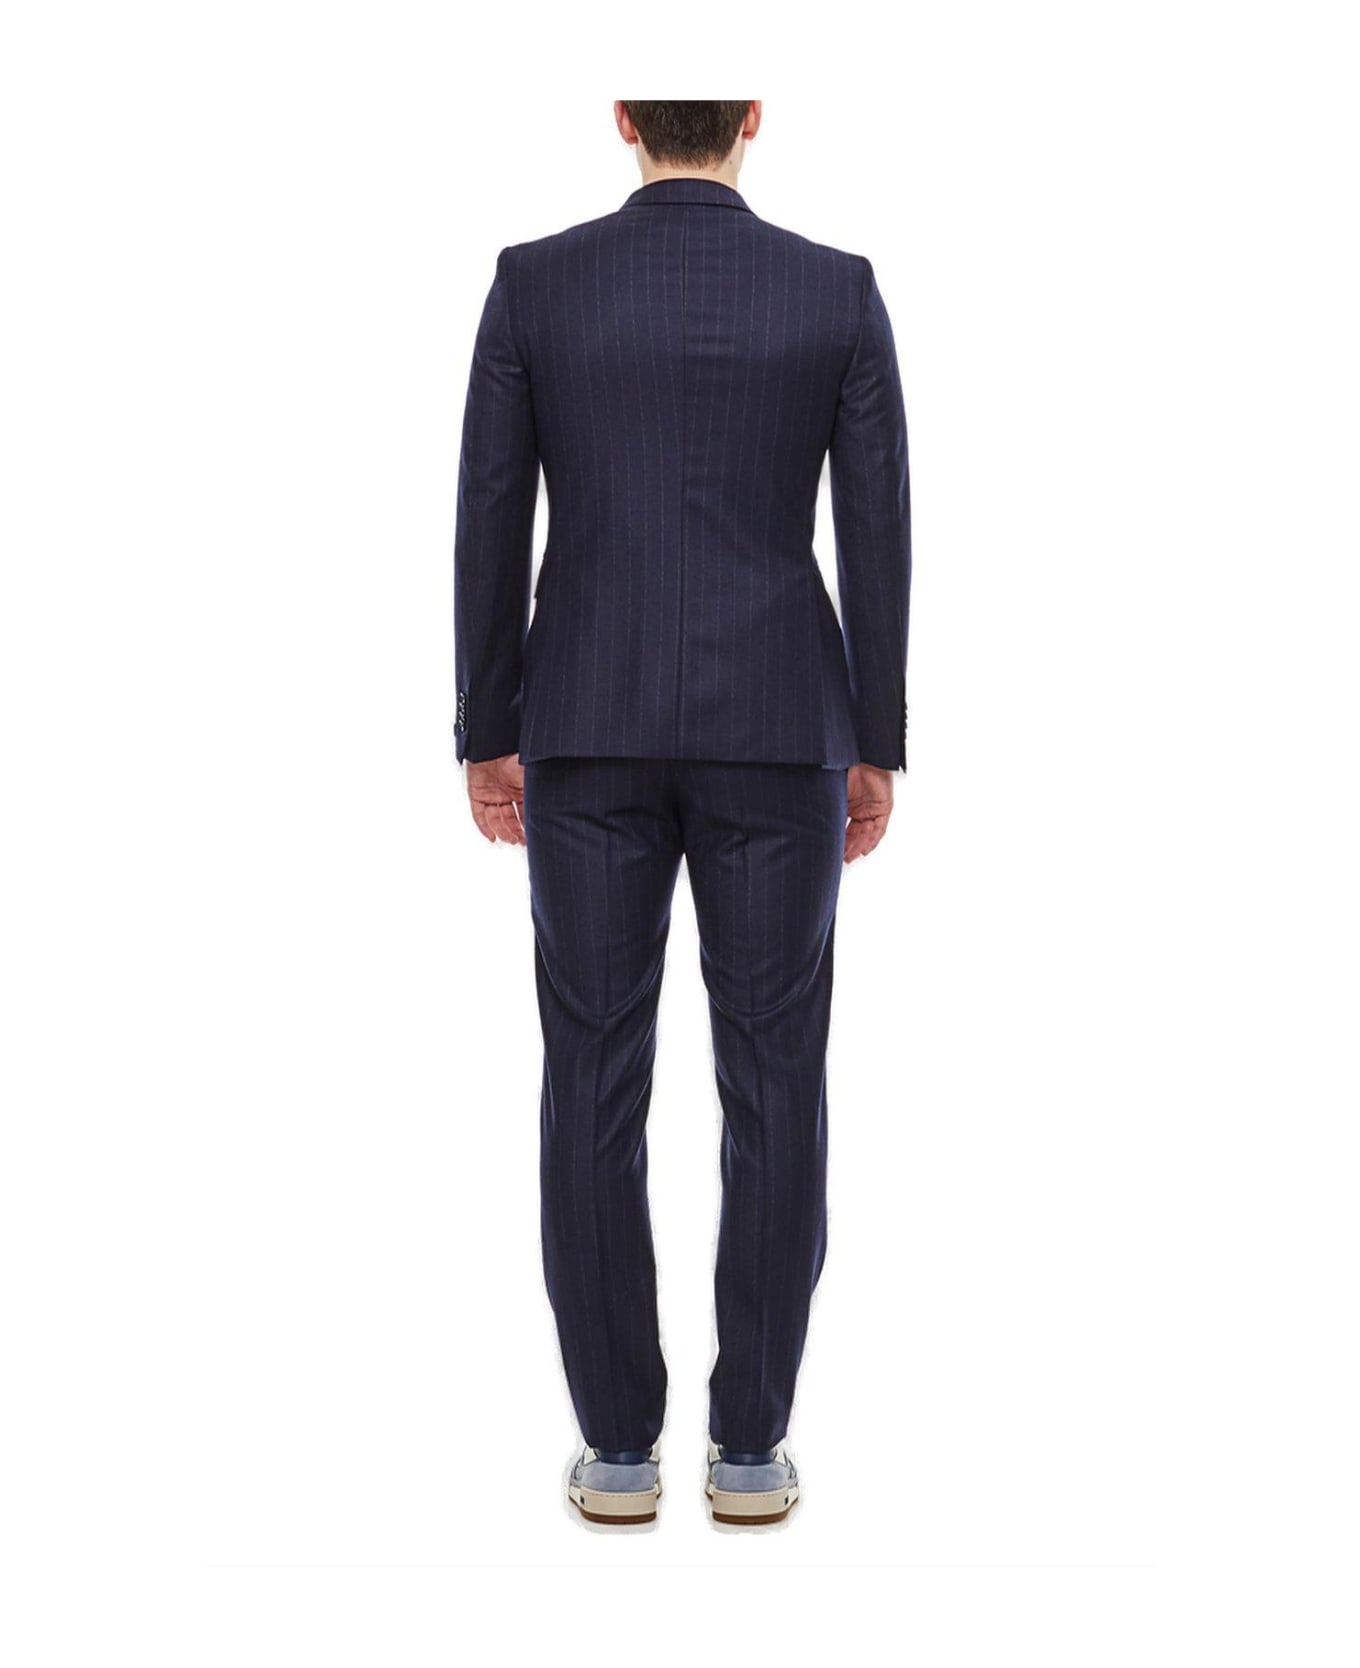 Tagliatore Double-breasted Two-piece Suit Set - Blu スーツ